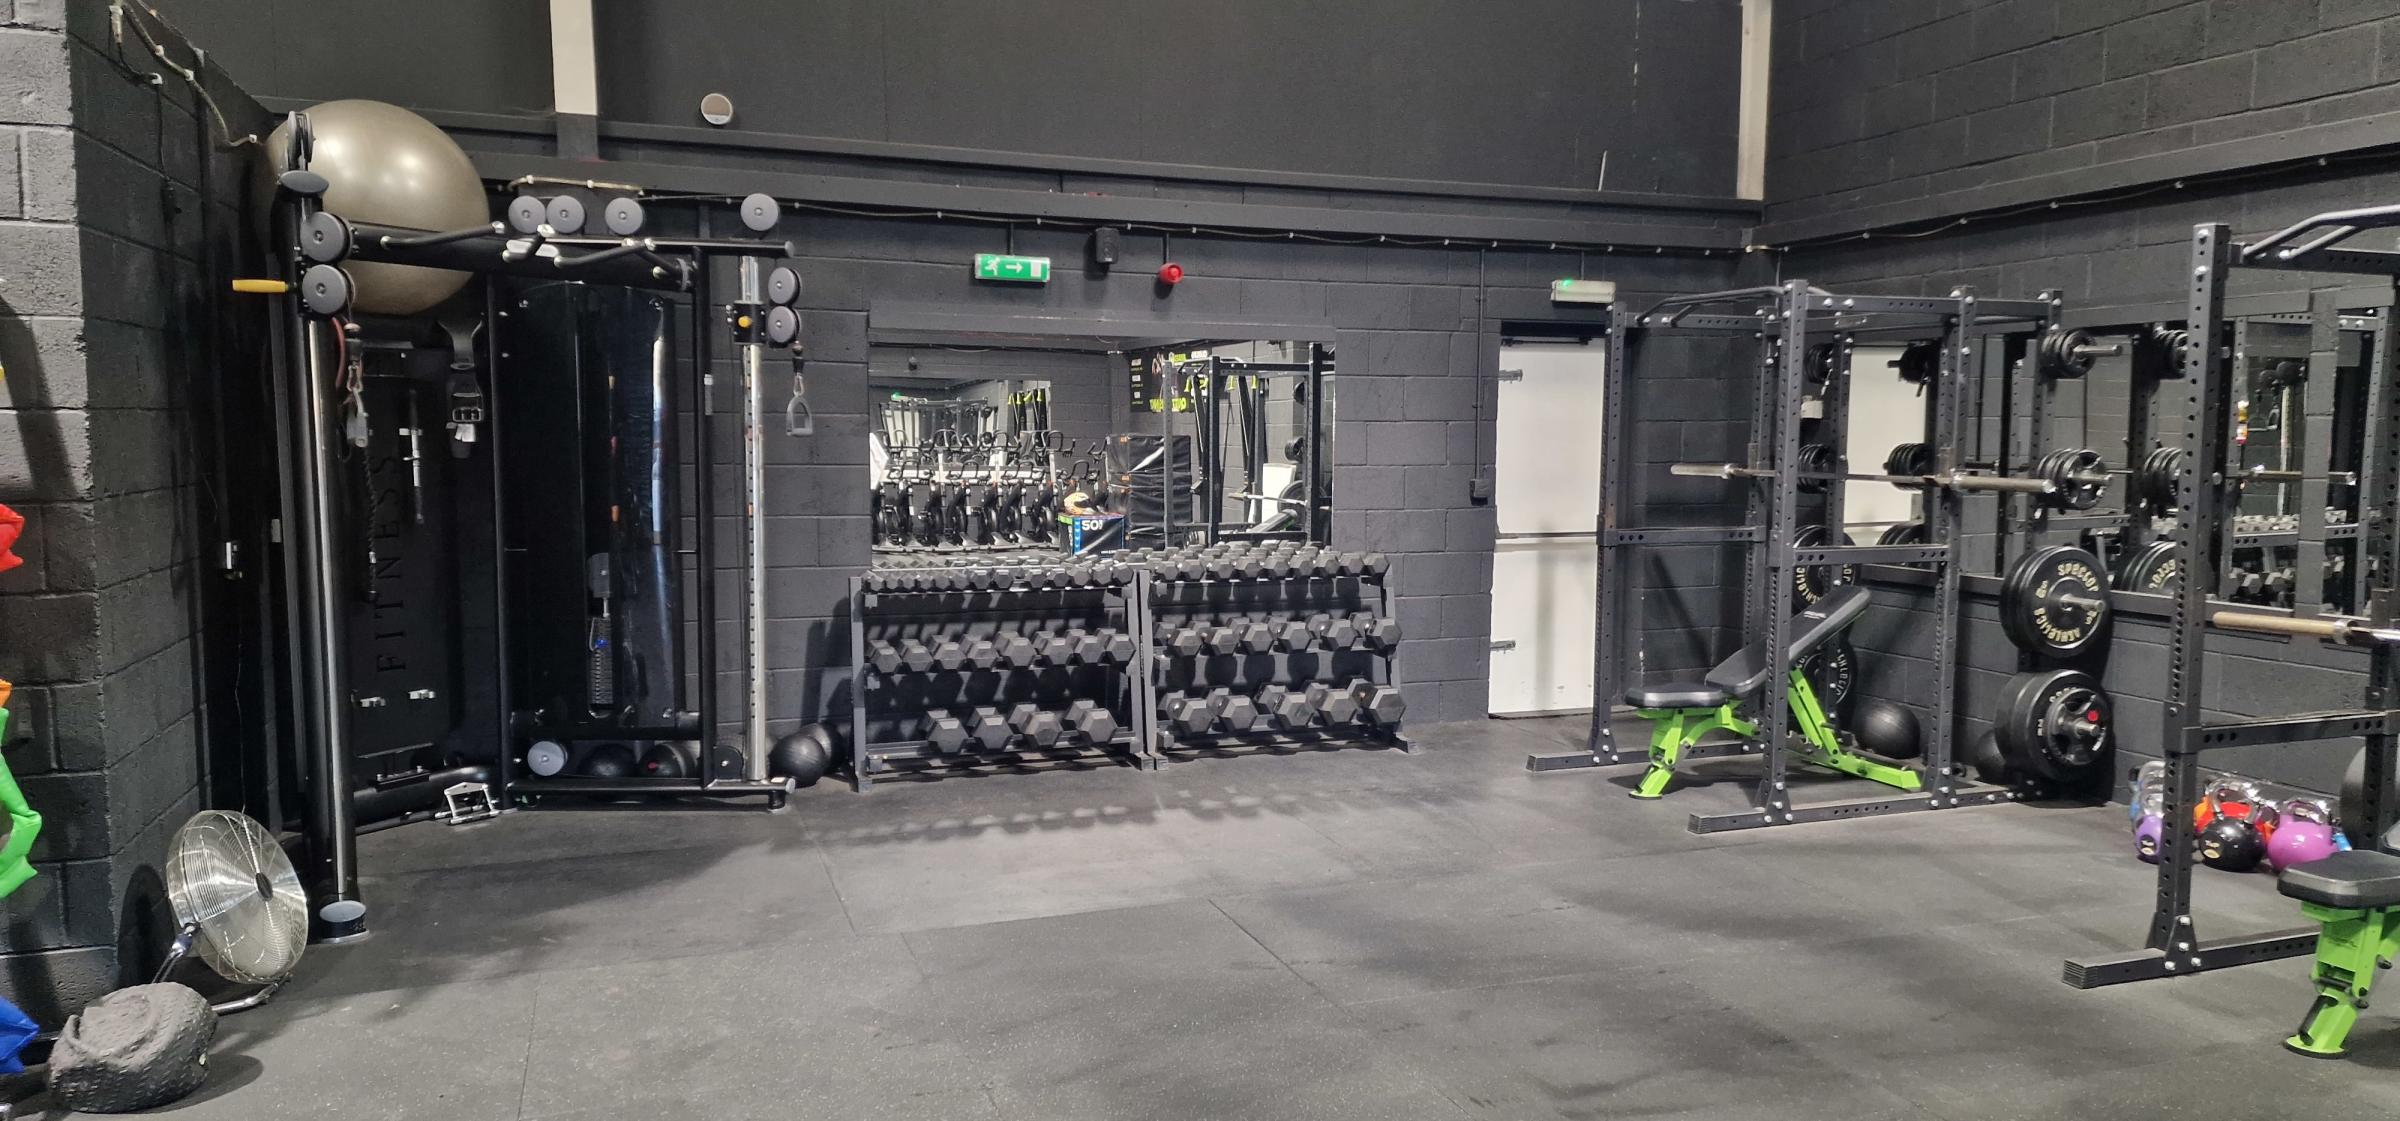 Ashley-James opened his first gym in 2018